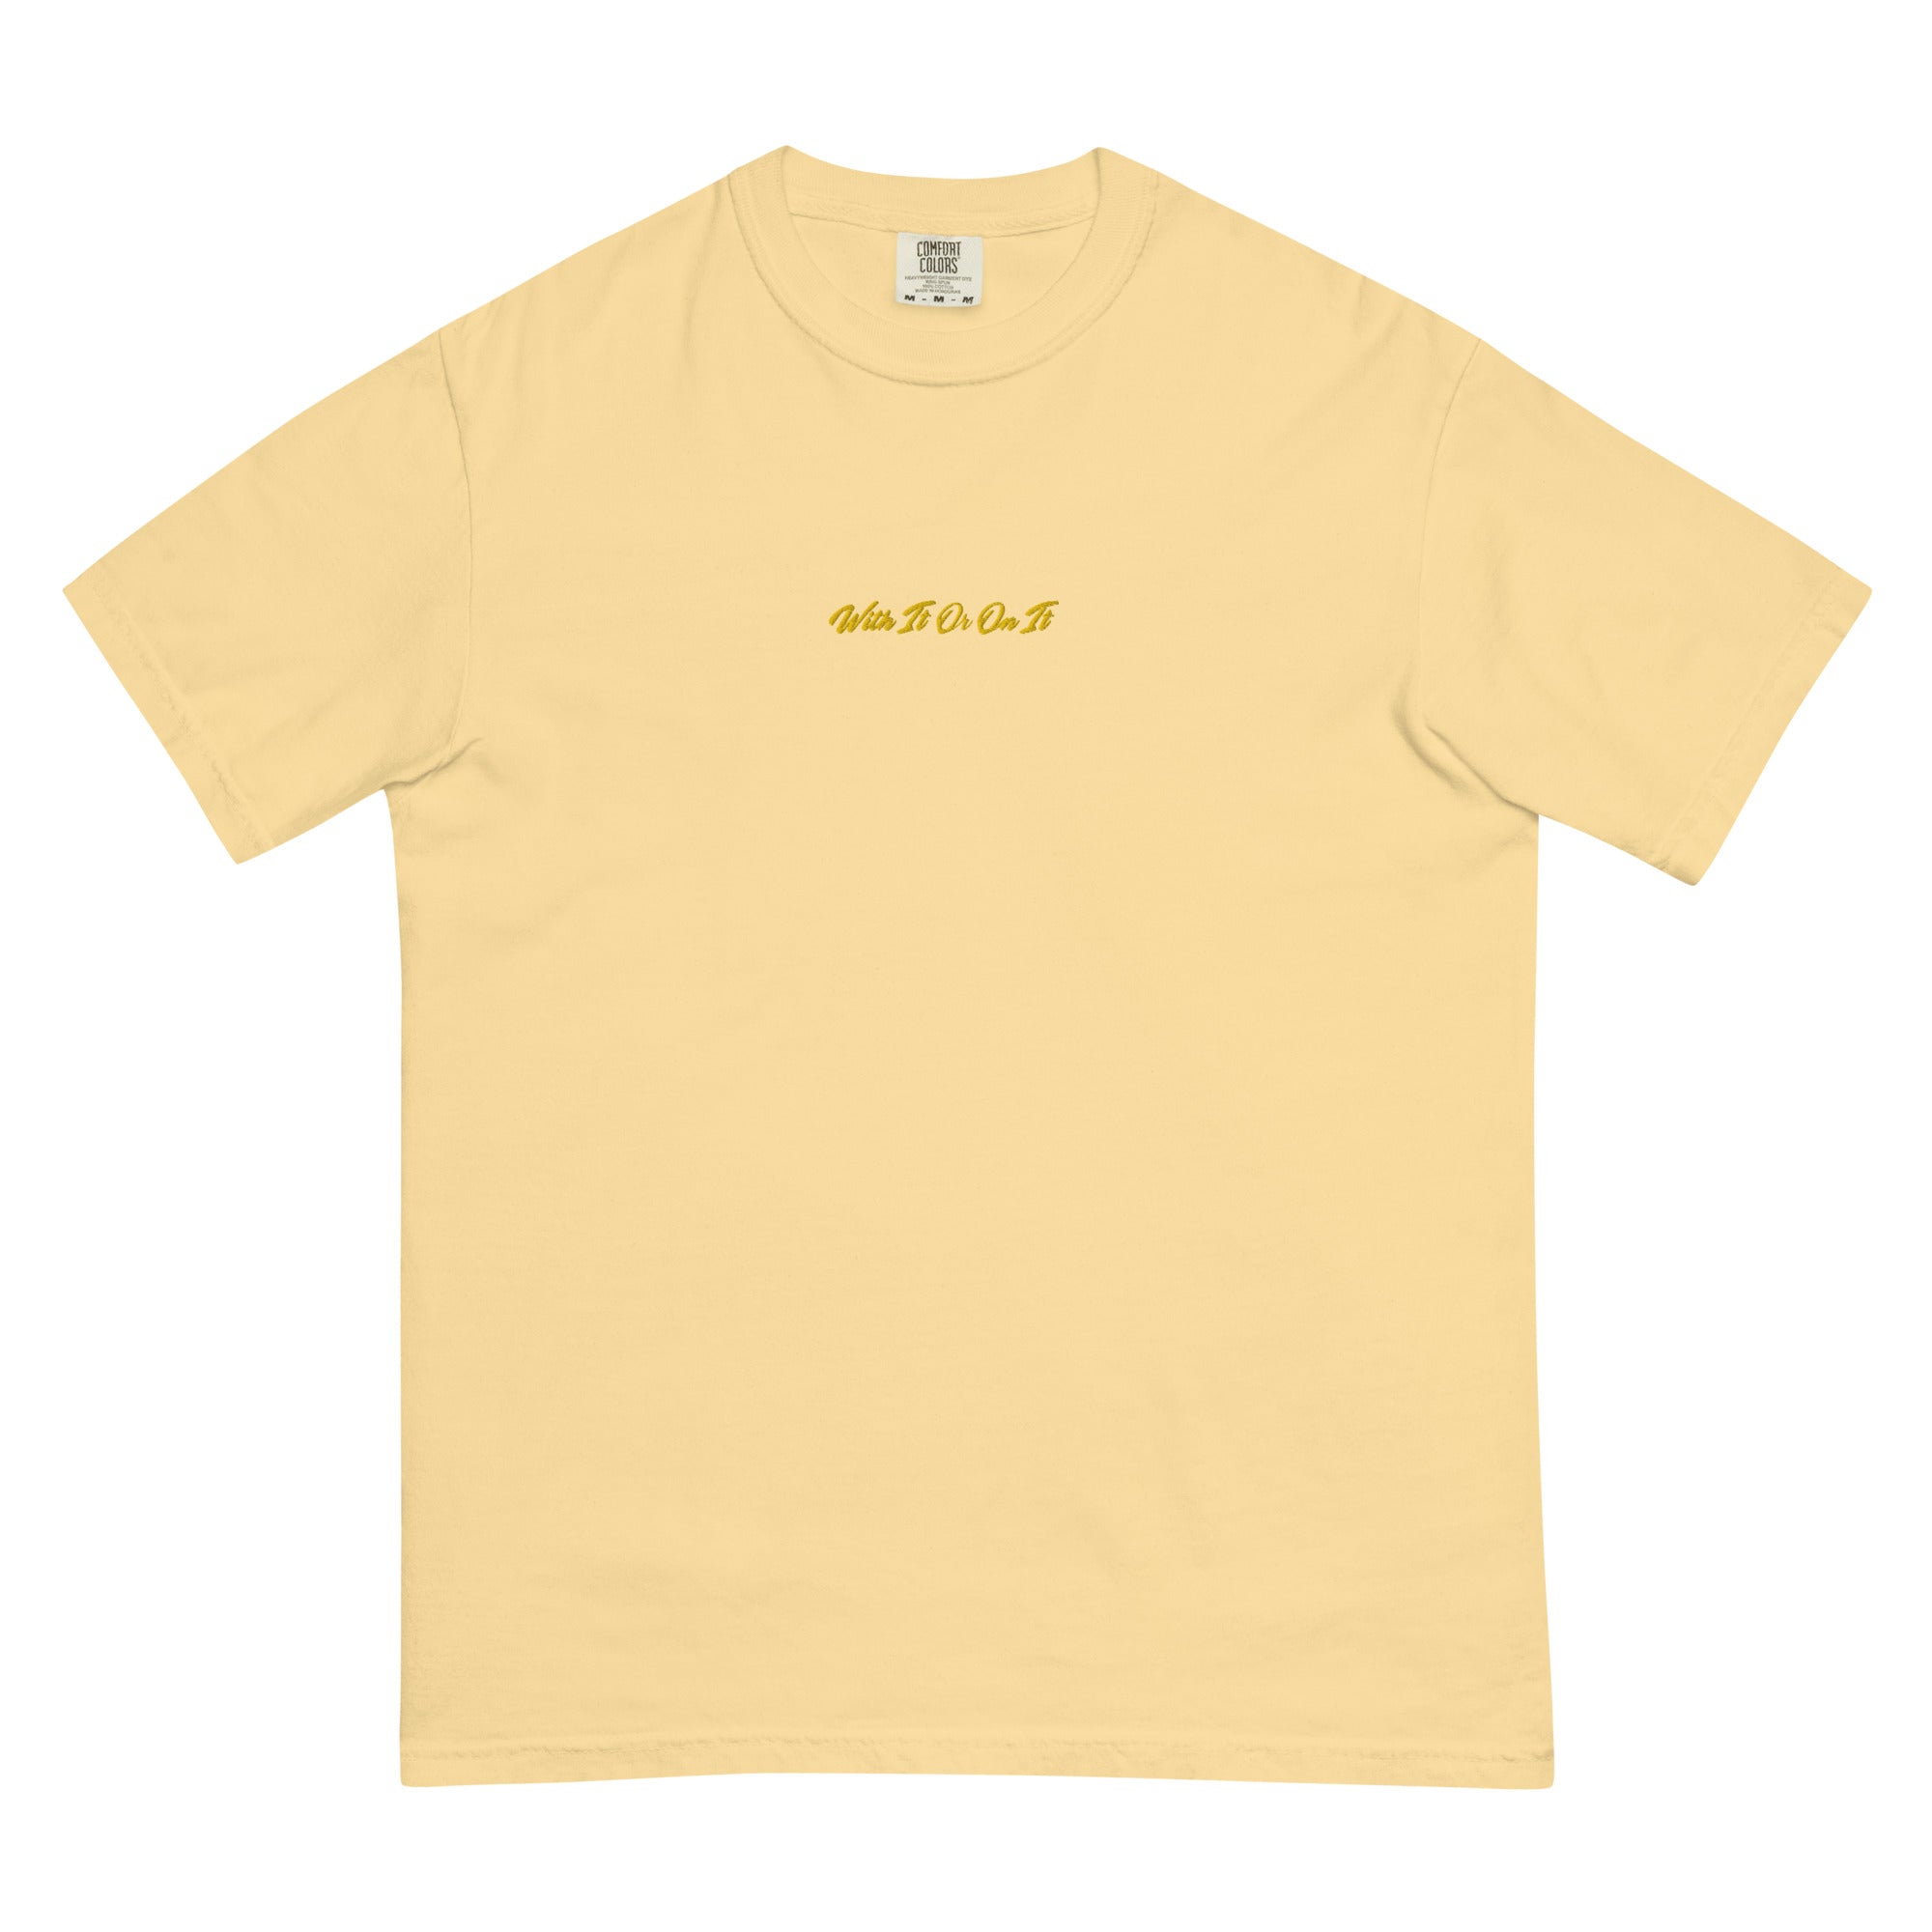 Butter Yellow Comfort Color T-shirt With Fabric 381A on White -  Canada